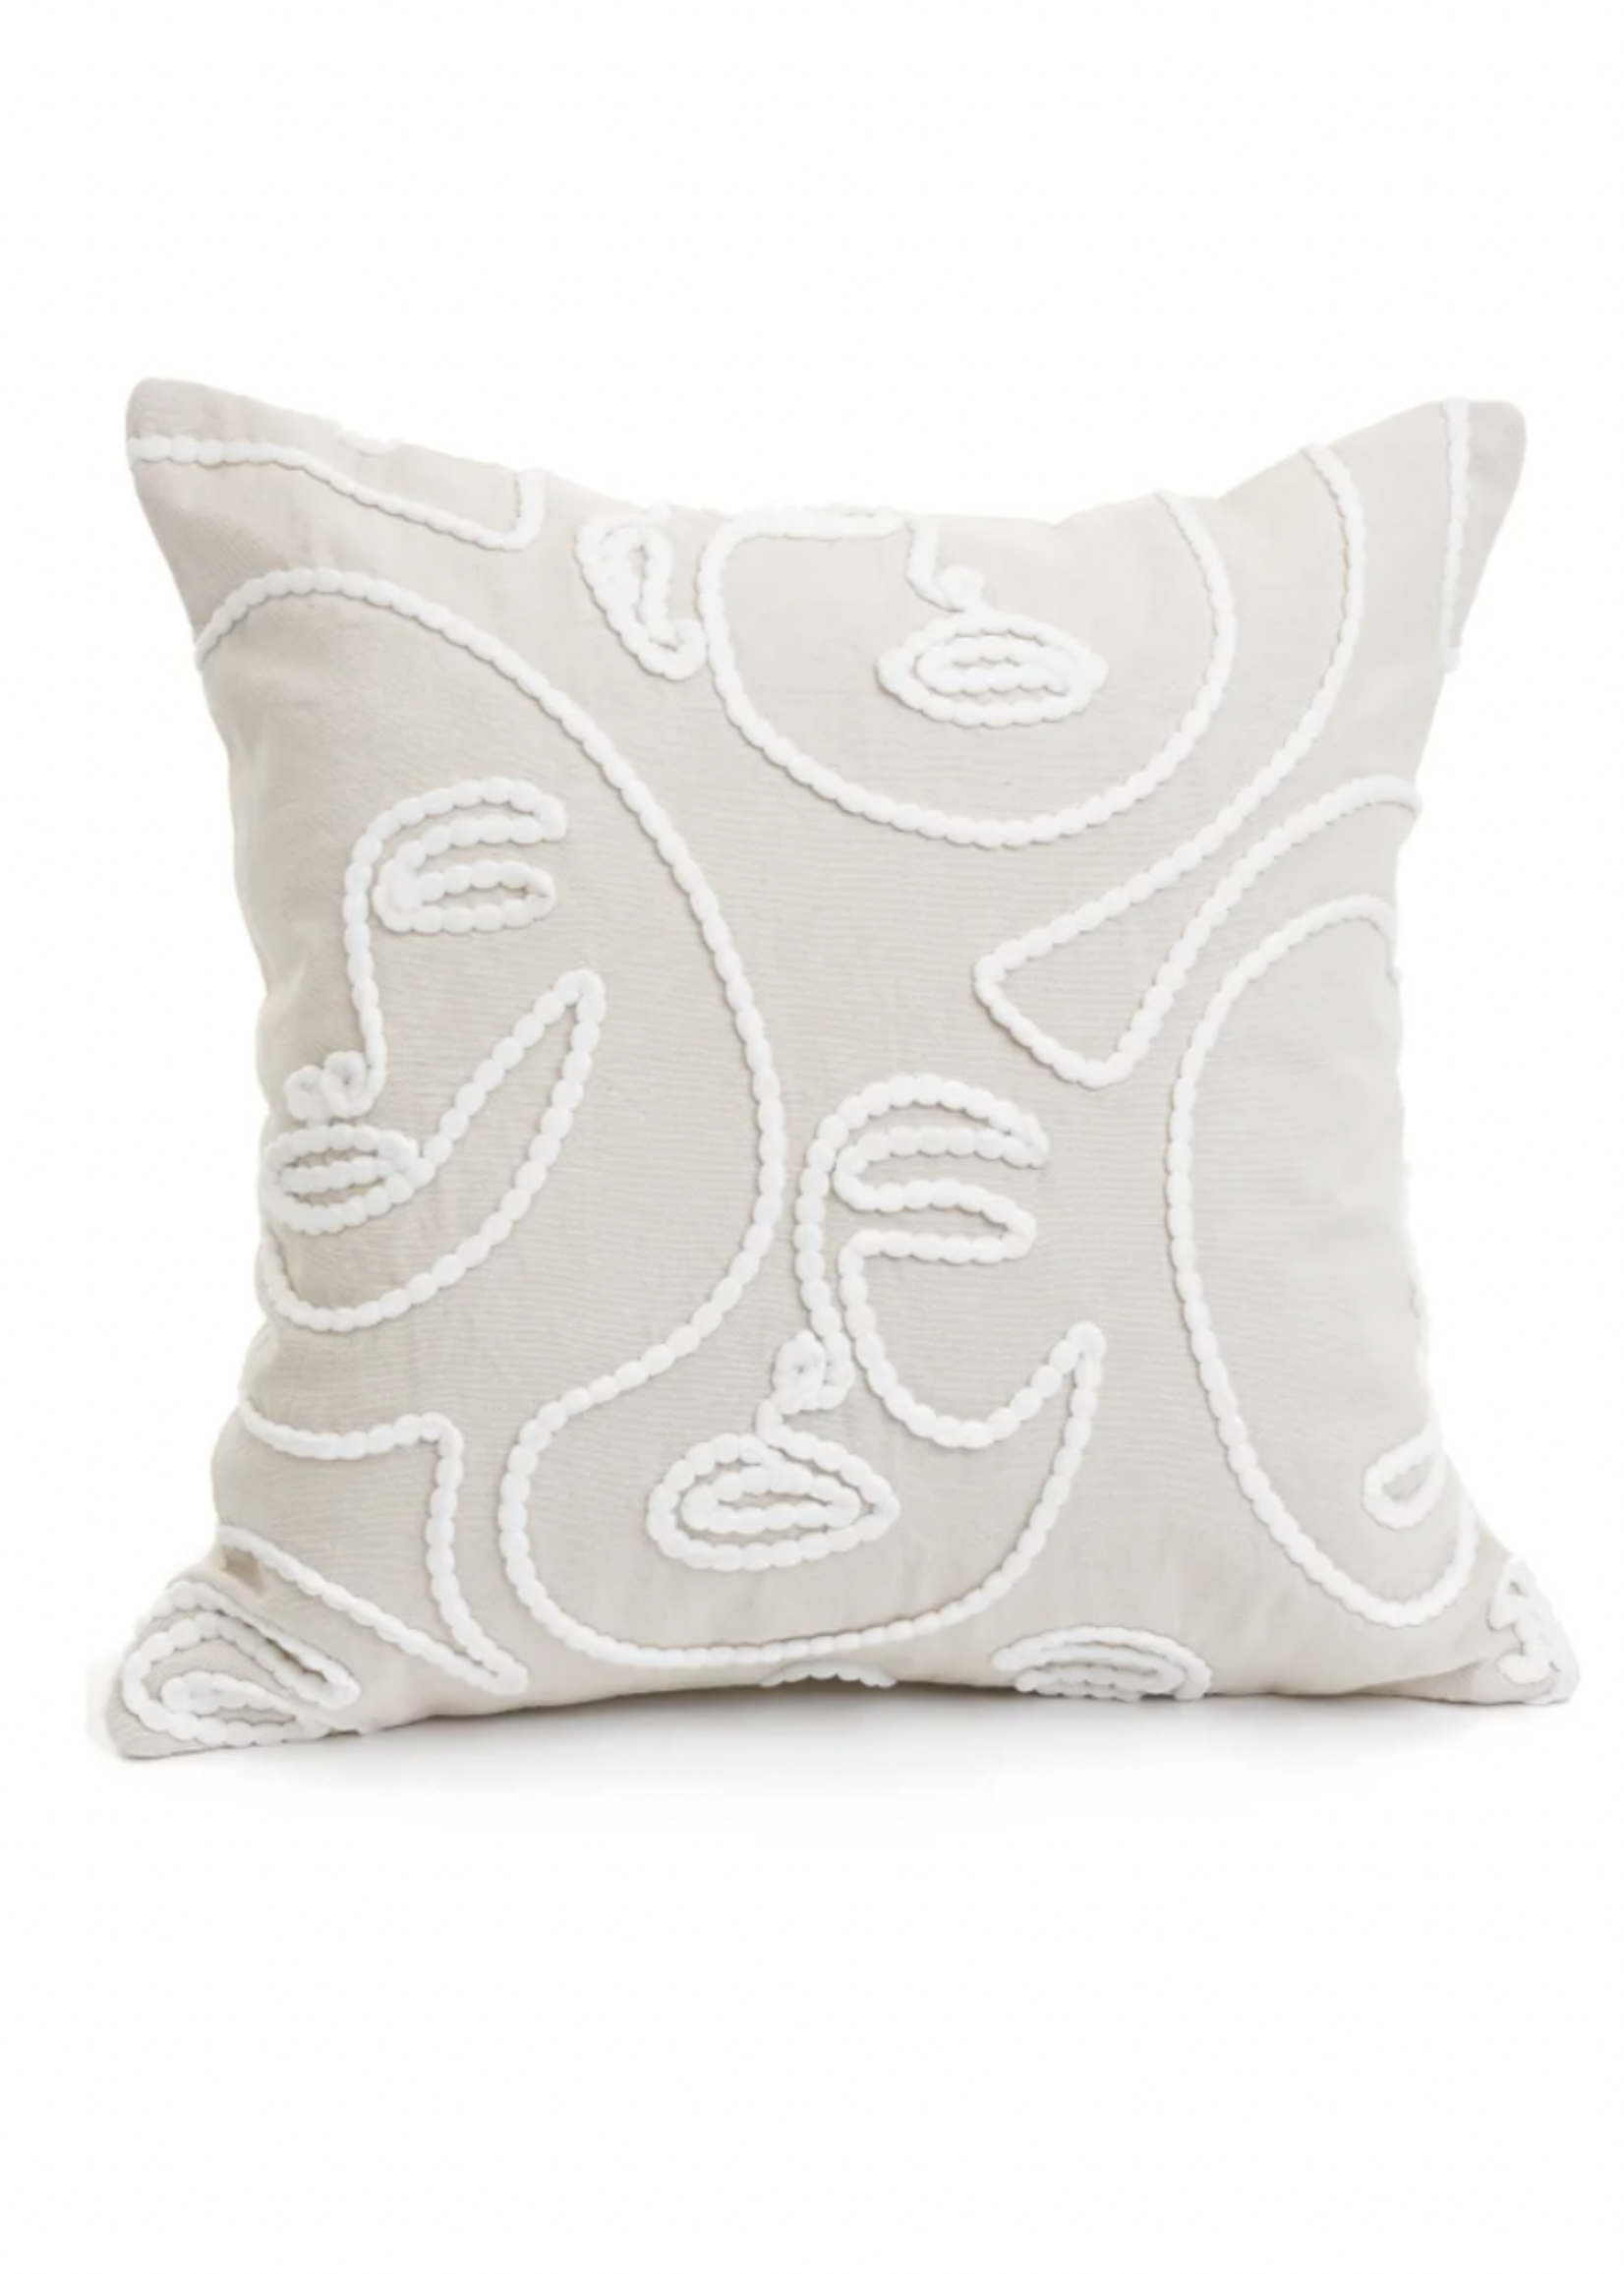 PAB 25% OFF Embroidered Line Art Pillow